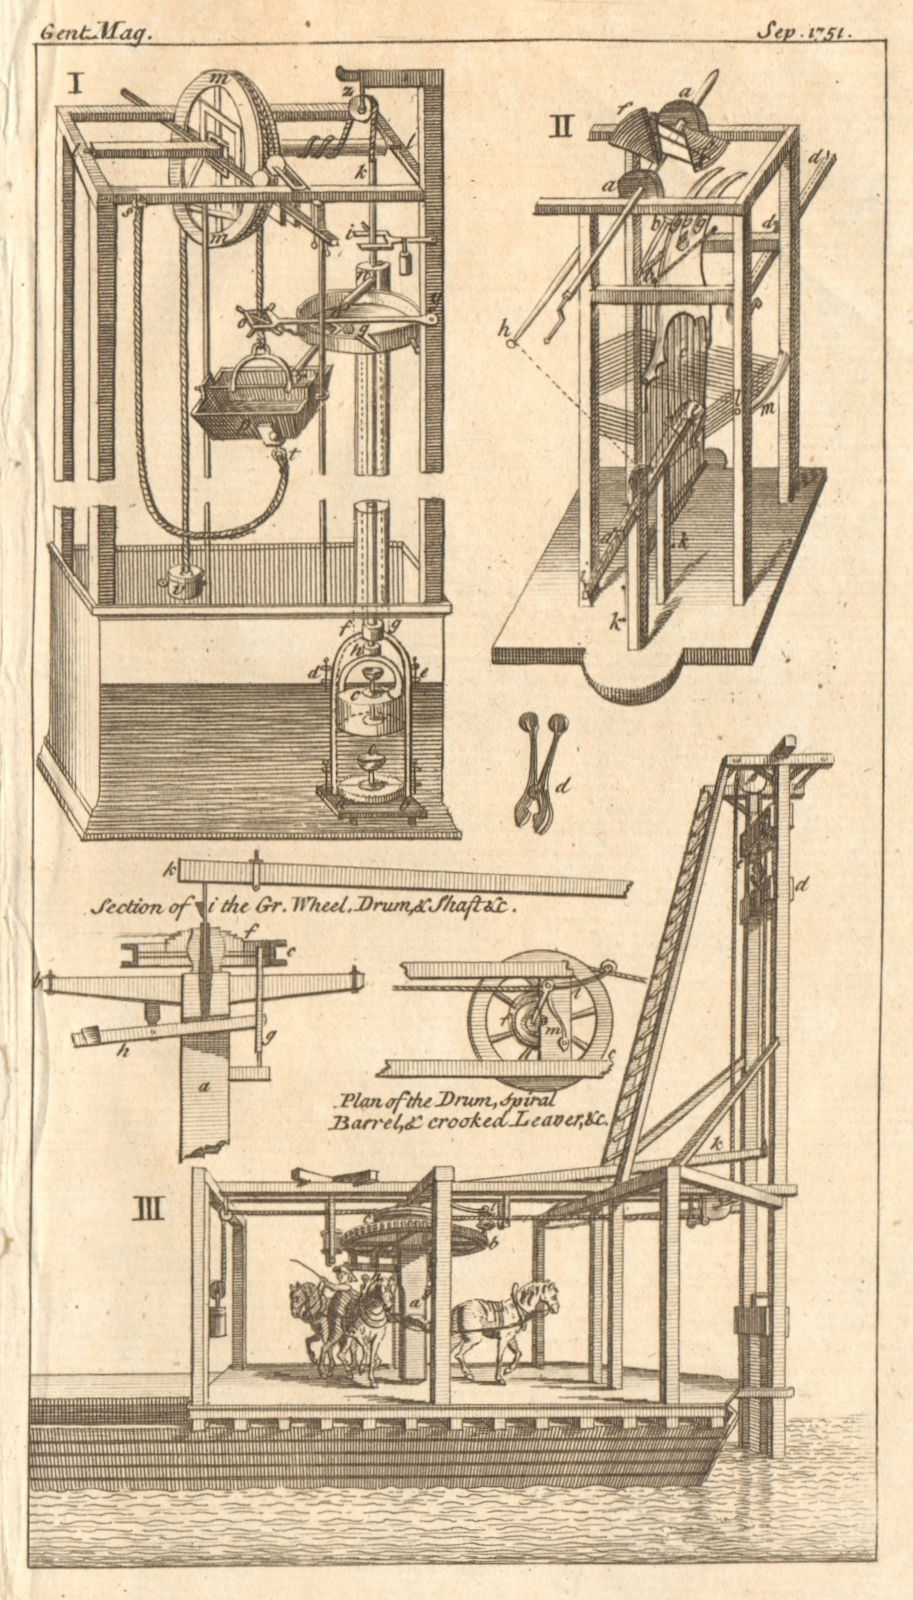 Self-moving/perpetual motion & weaving engines. Pile driver. Inventions 1751